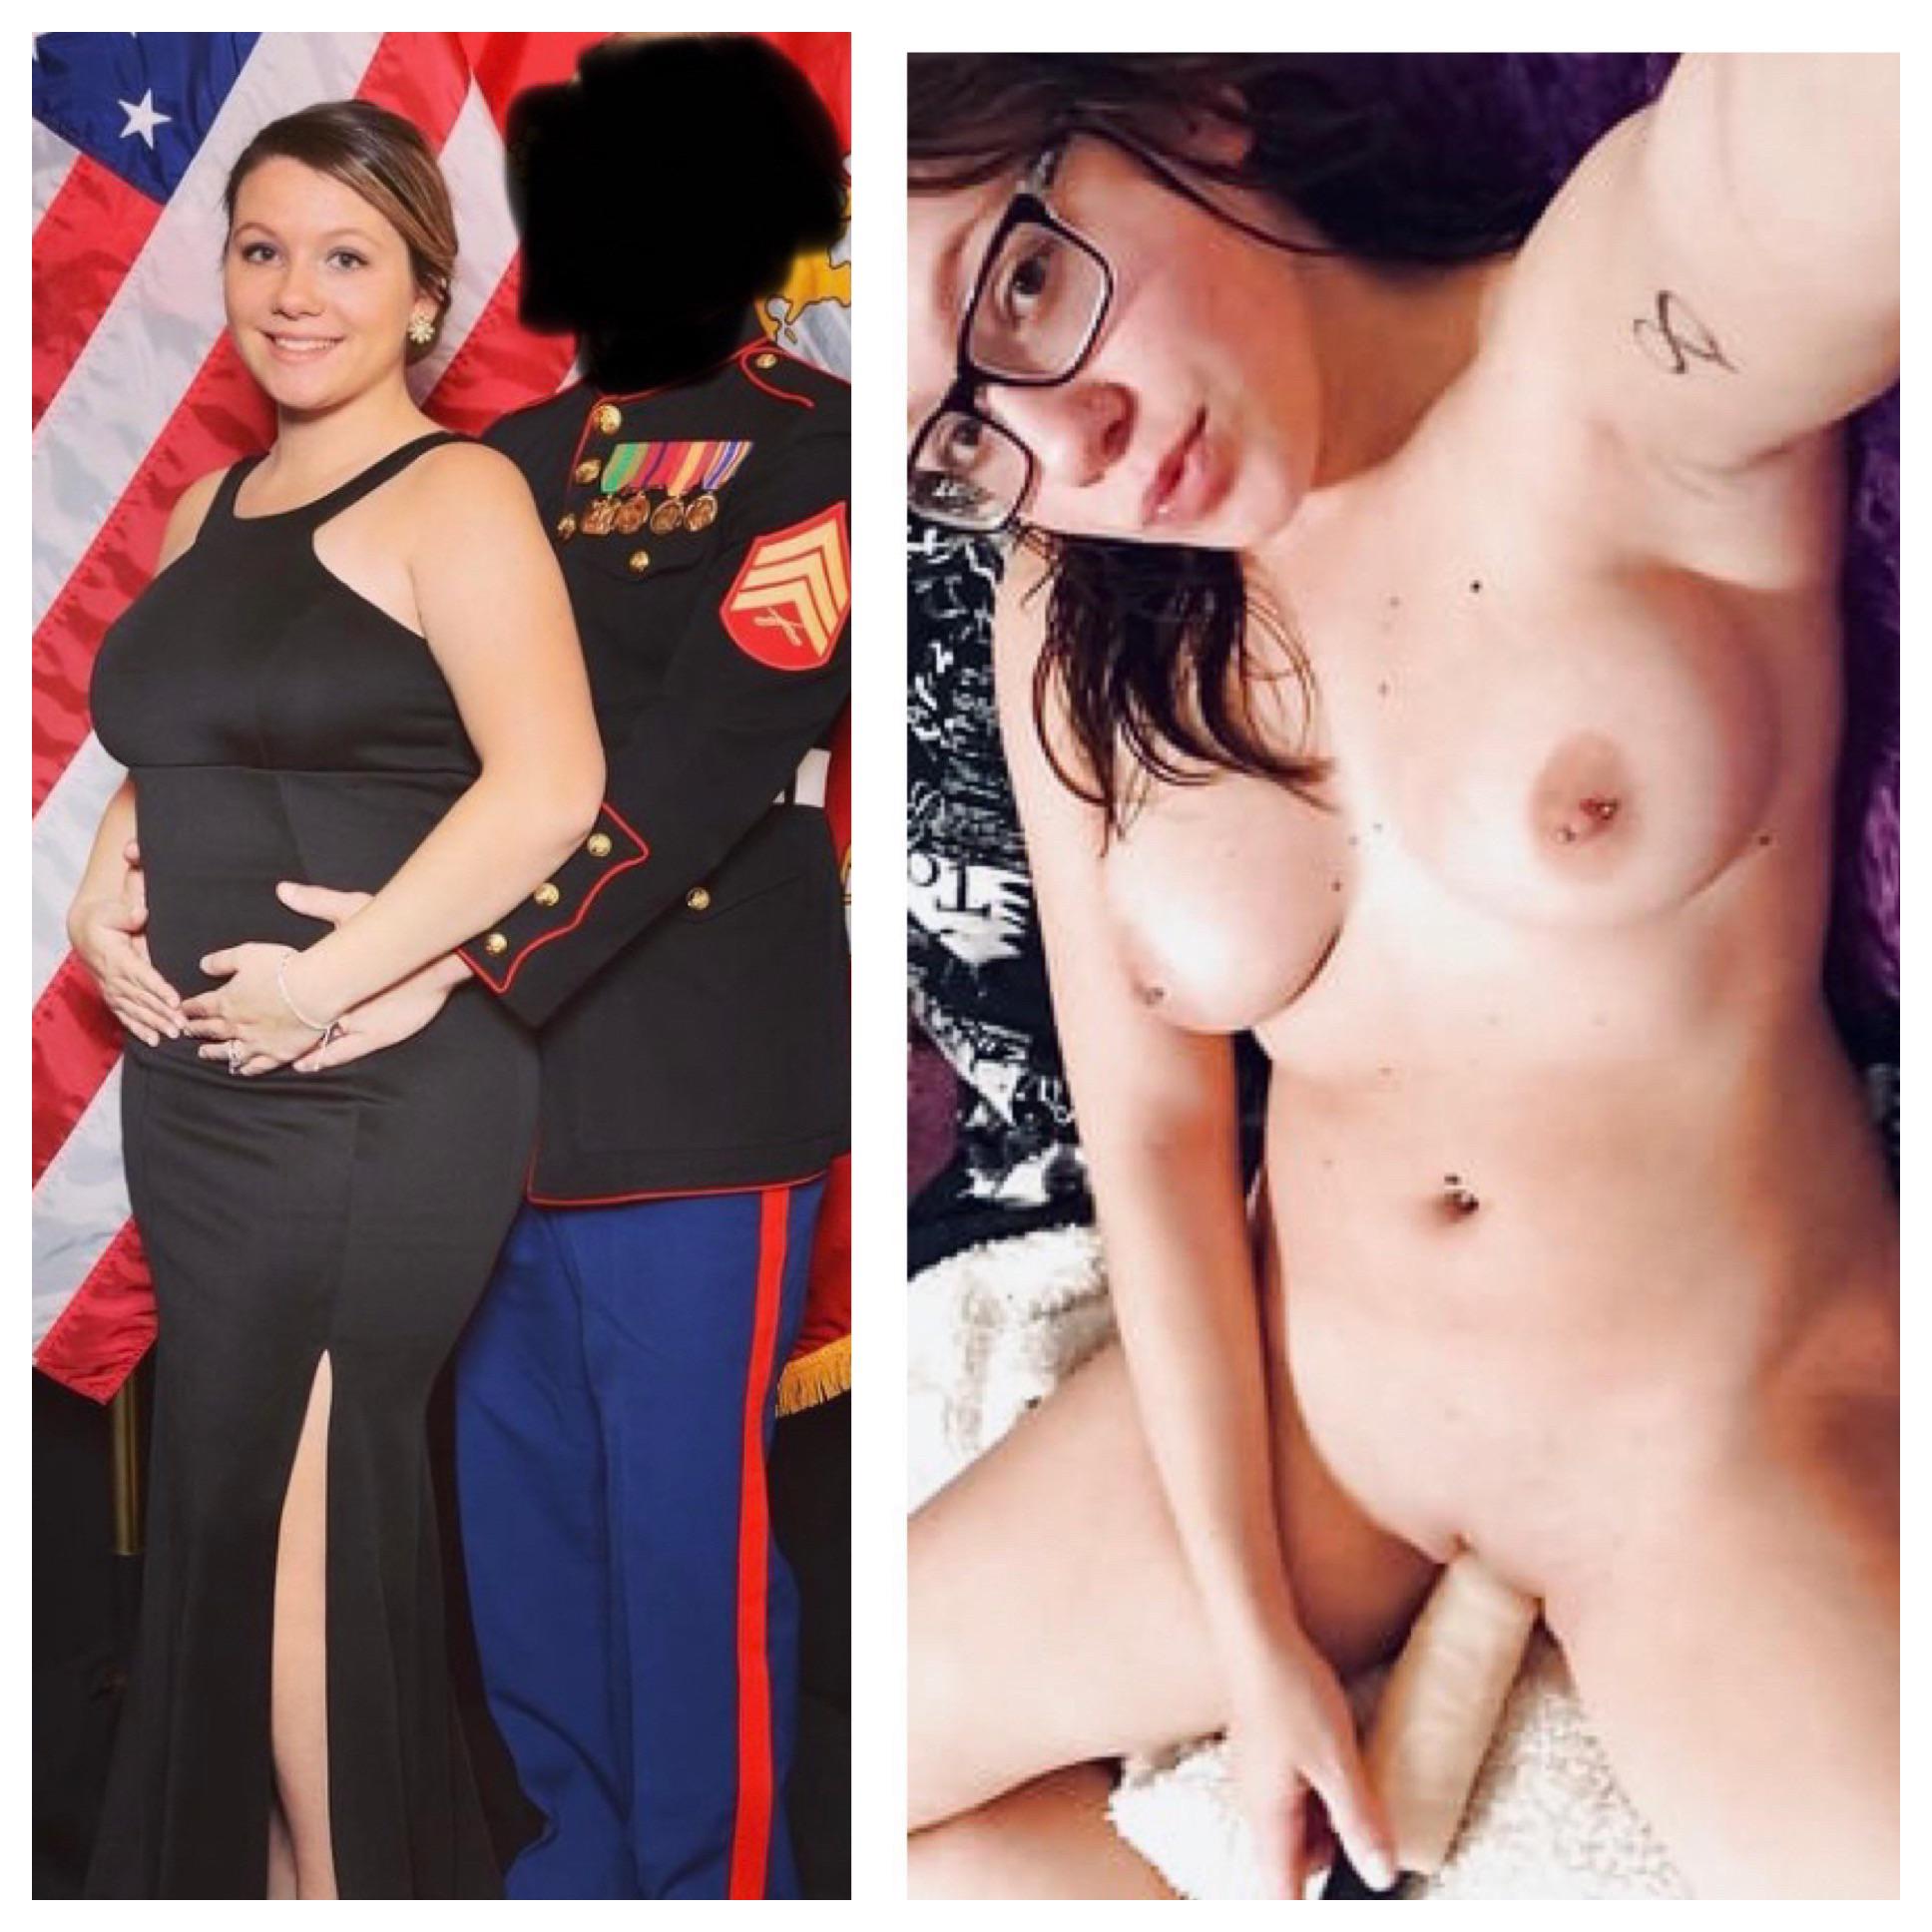 Military wife by day. Horny slut by night ?